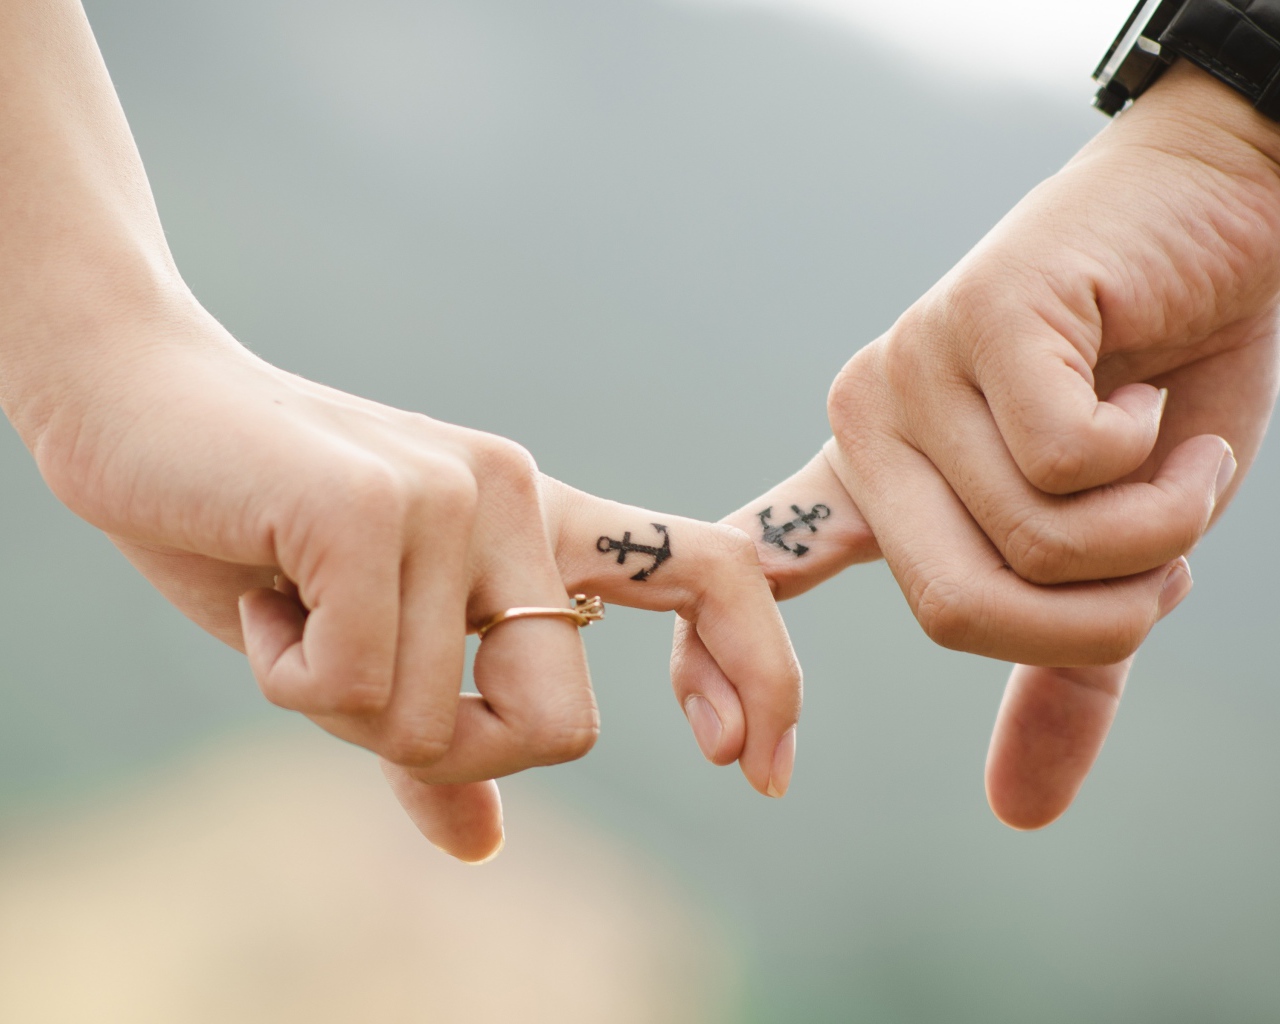 Hands of a loving couple with tattoos on their hands.